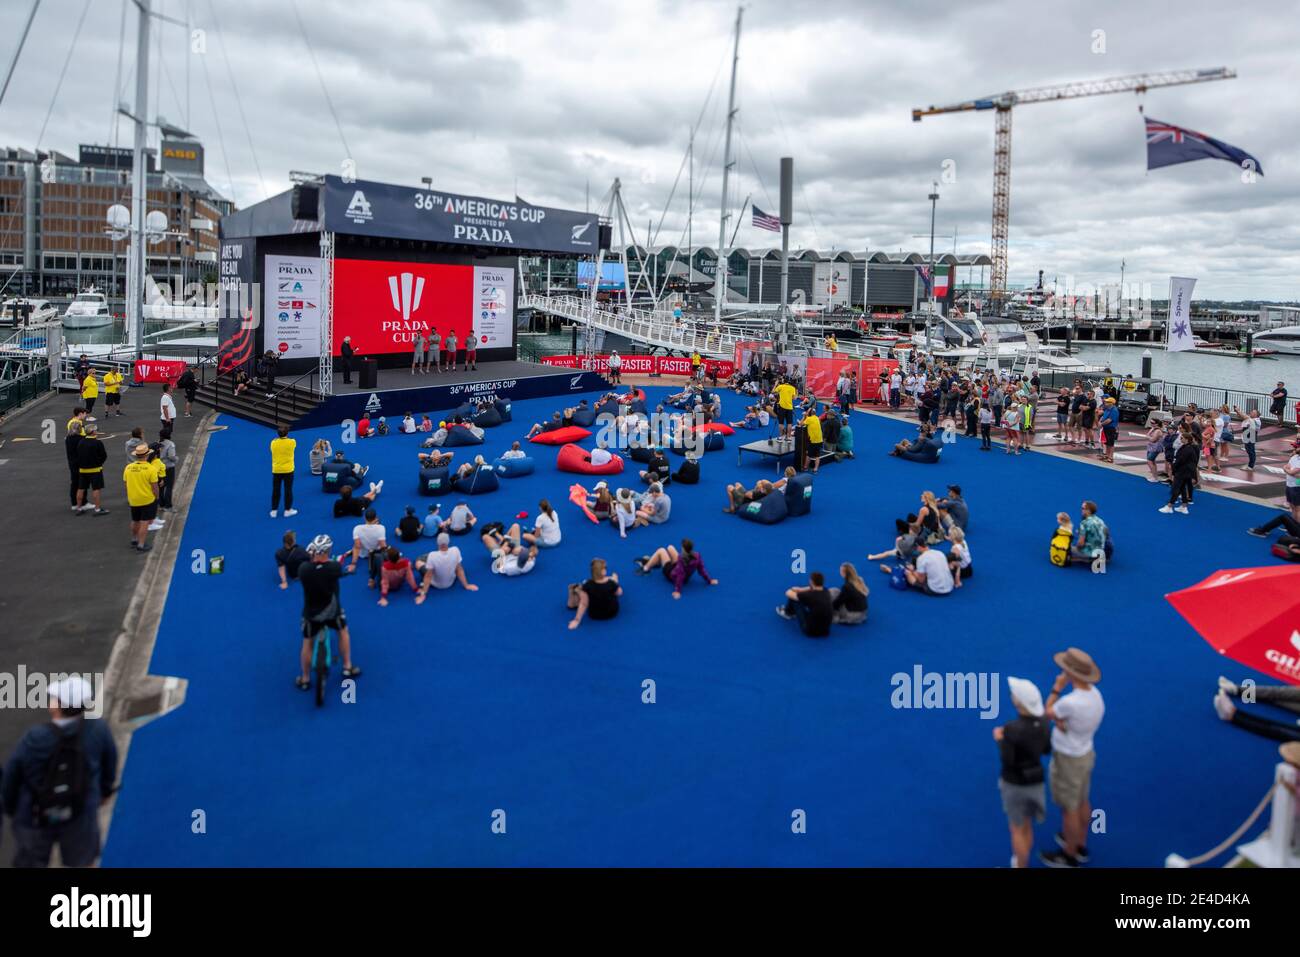 Auckland, New Zealand. 23rd Jan, 2021. Two sailors each from INEOS Team UK and Luna Rossa Prada Pirelli Team on stage at the America's Cup village ahead of their Round Robin three match of the Prada Cup. Saturday 23th of Jan 2021. Copyright Credit: Chris Cameron/Alamy Live News Stock Photo